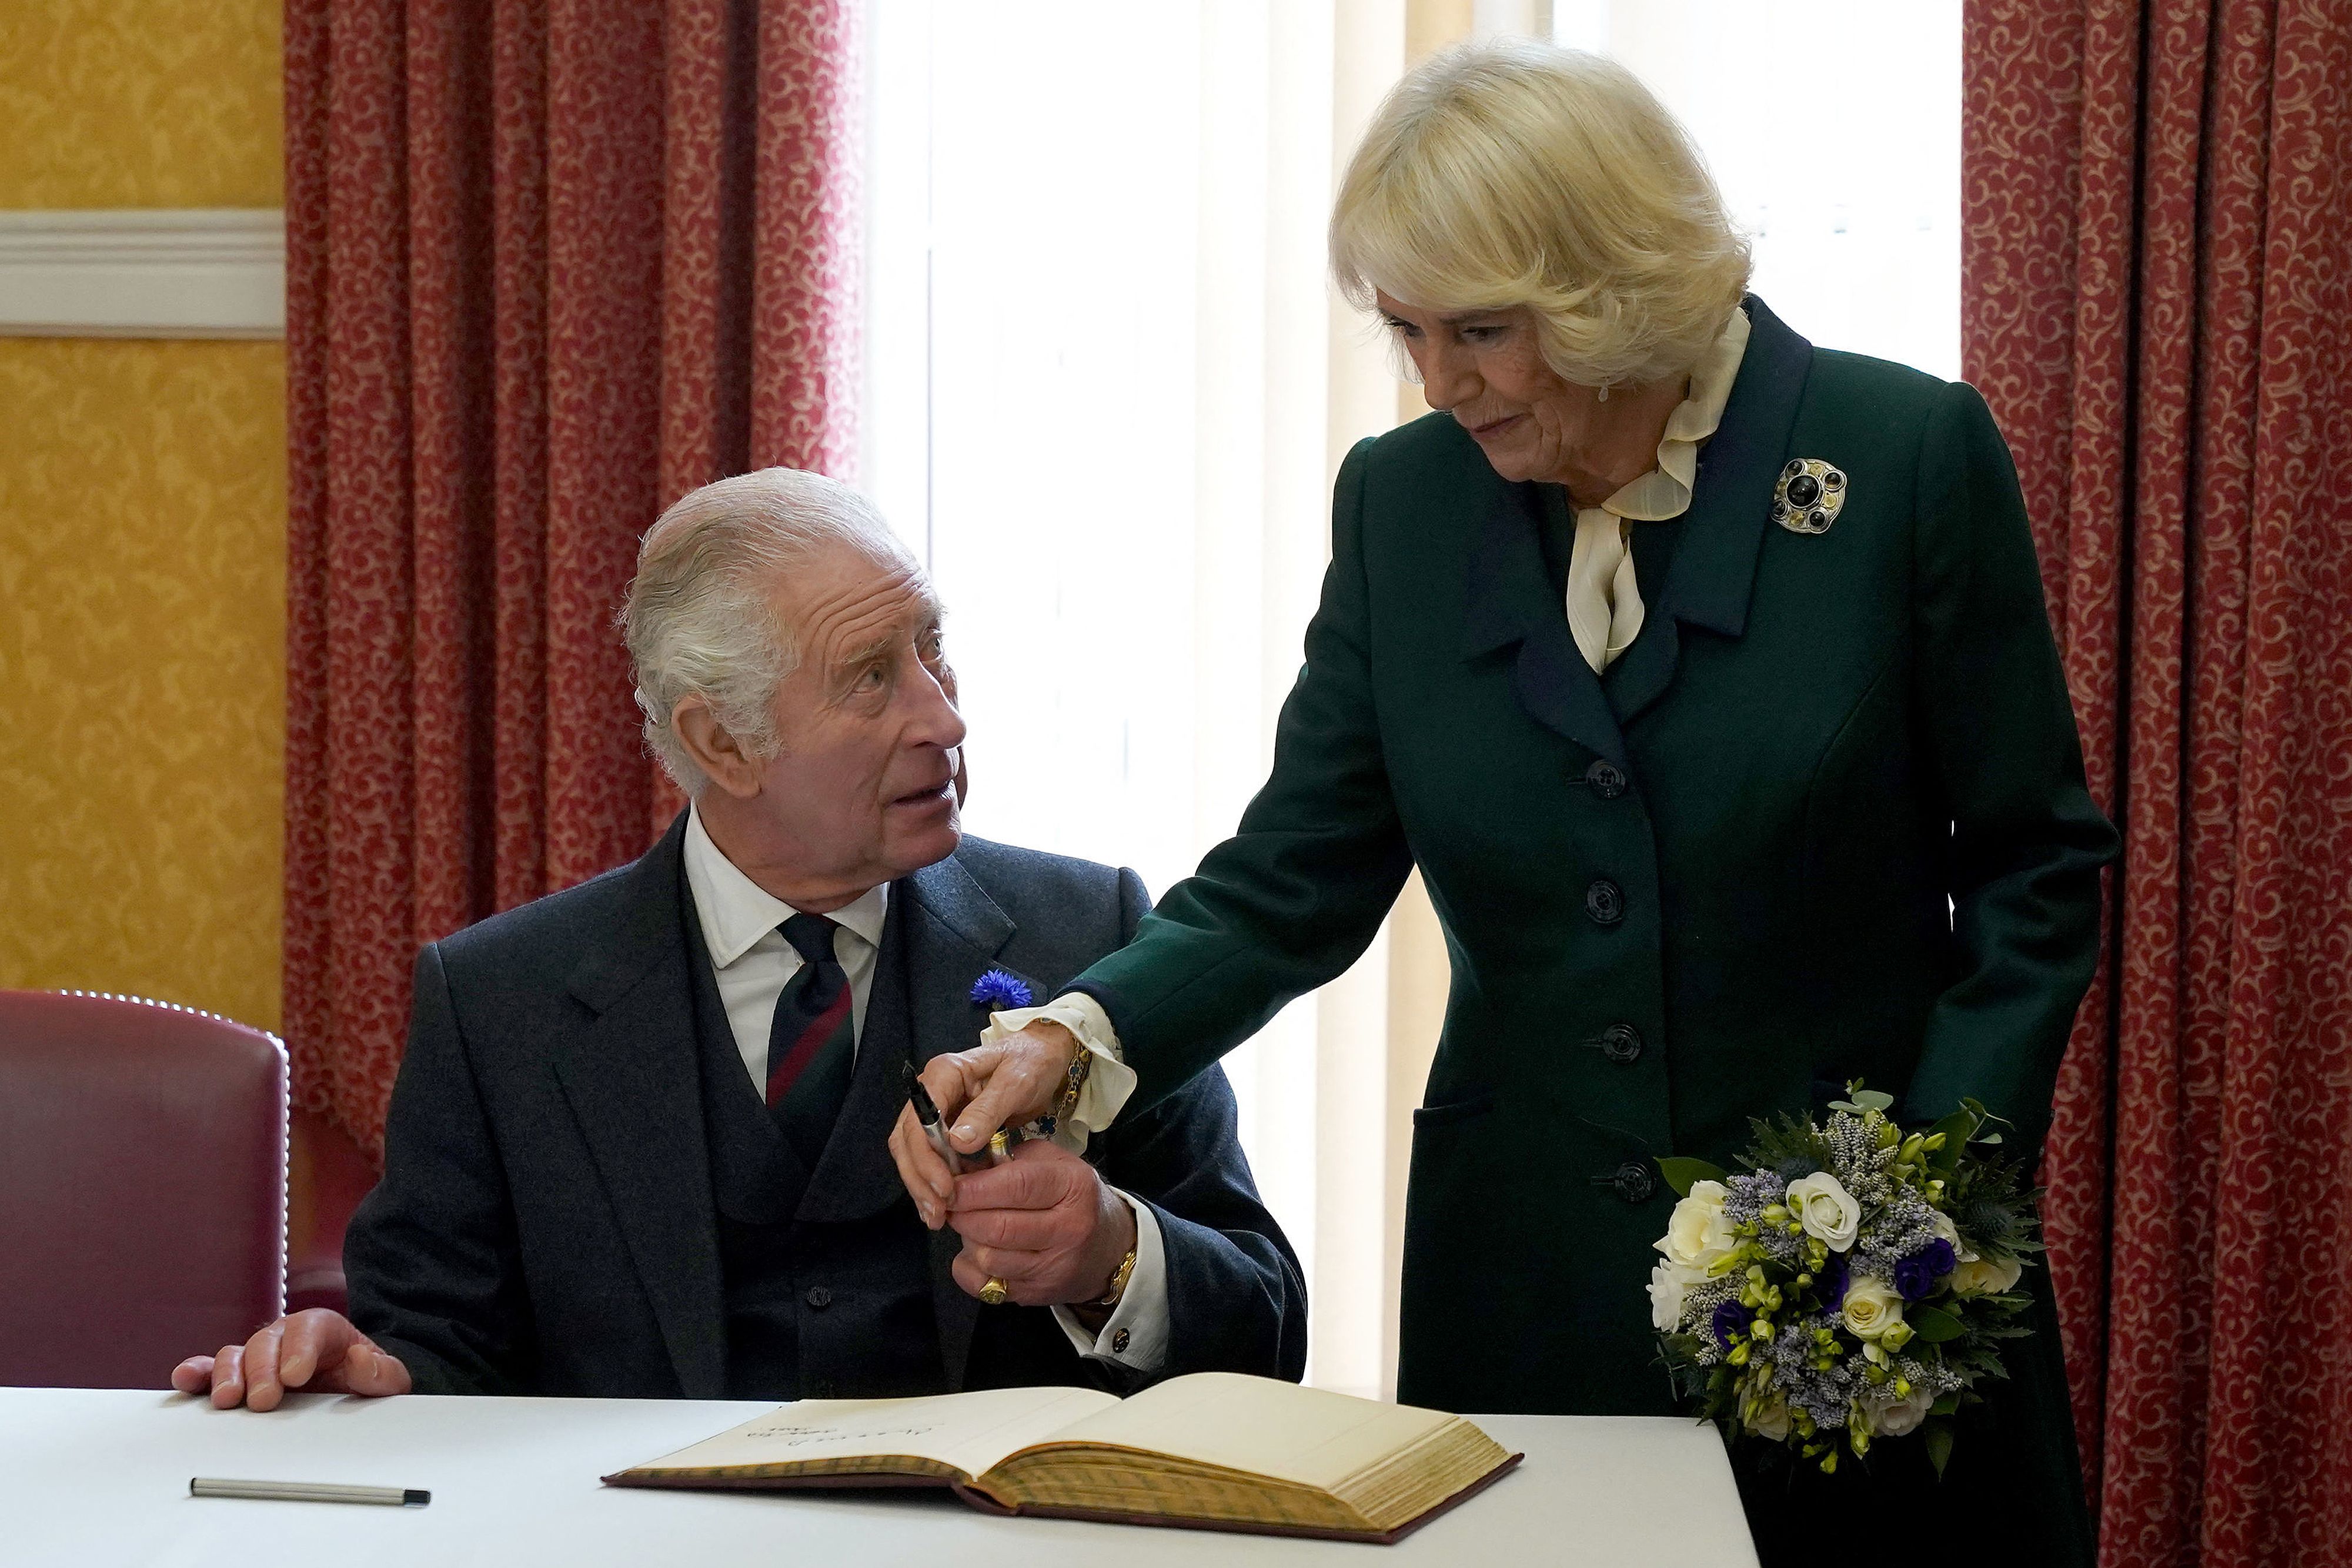 King Charles III and Camilla Parker Bowles sign a visitors' book after attending an official council meeting